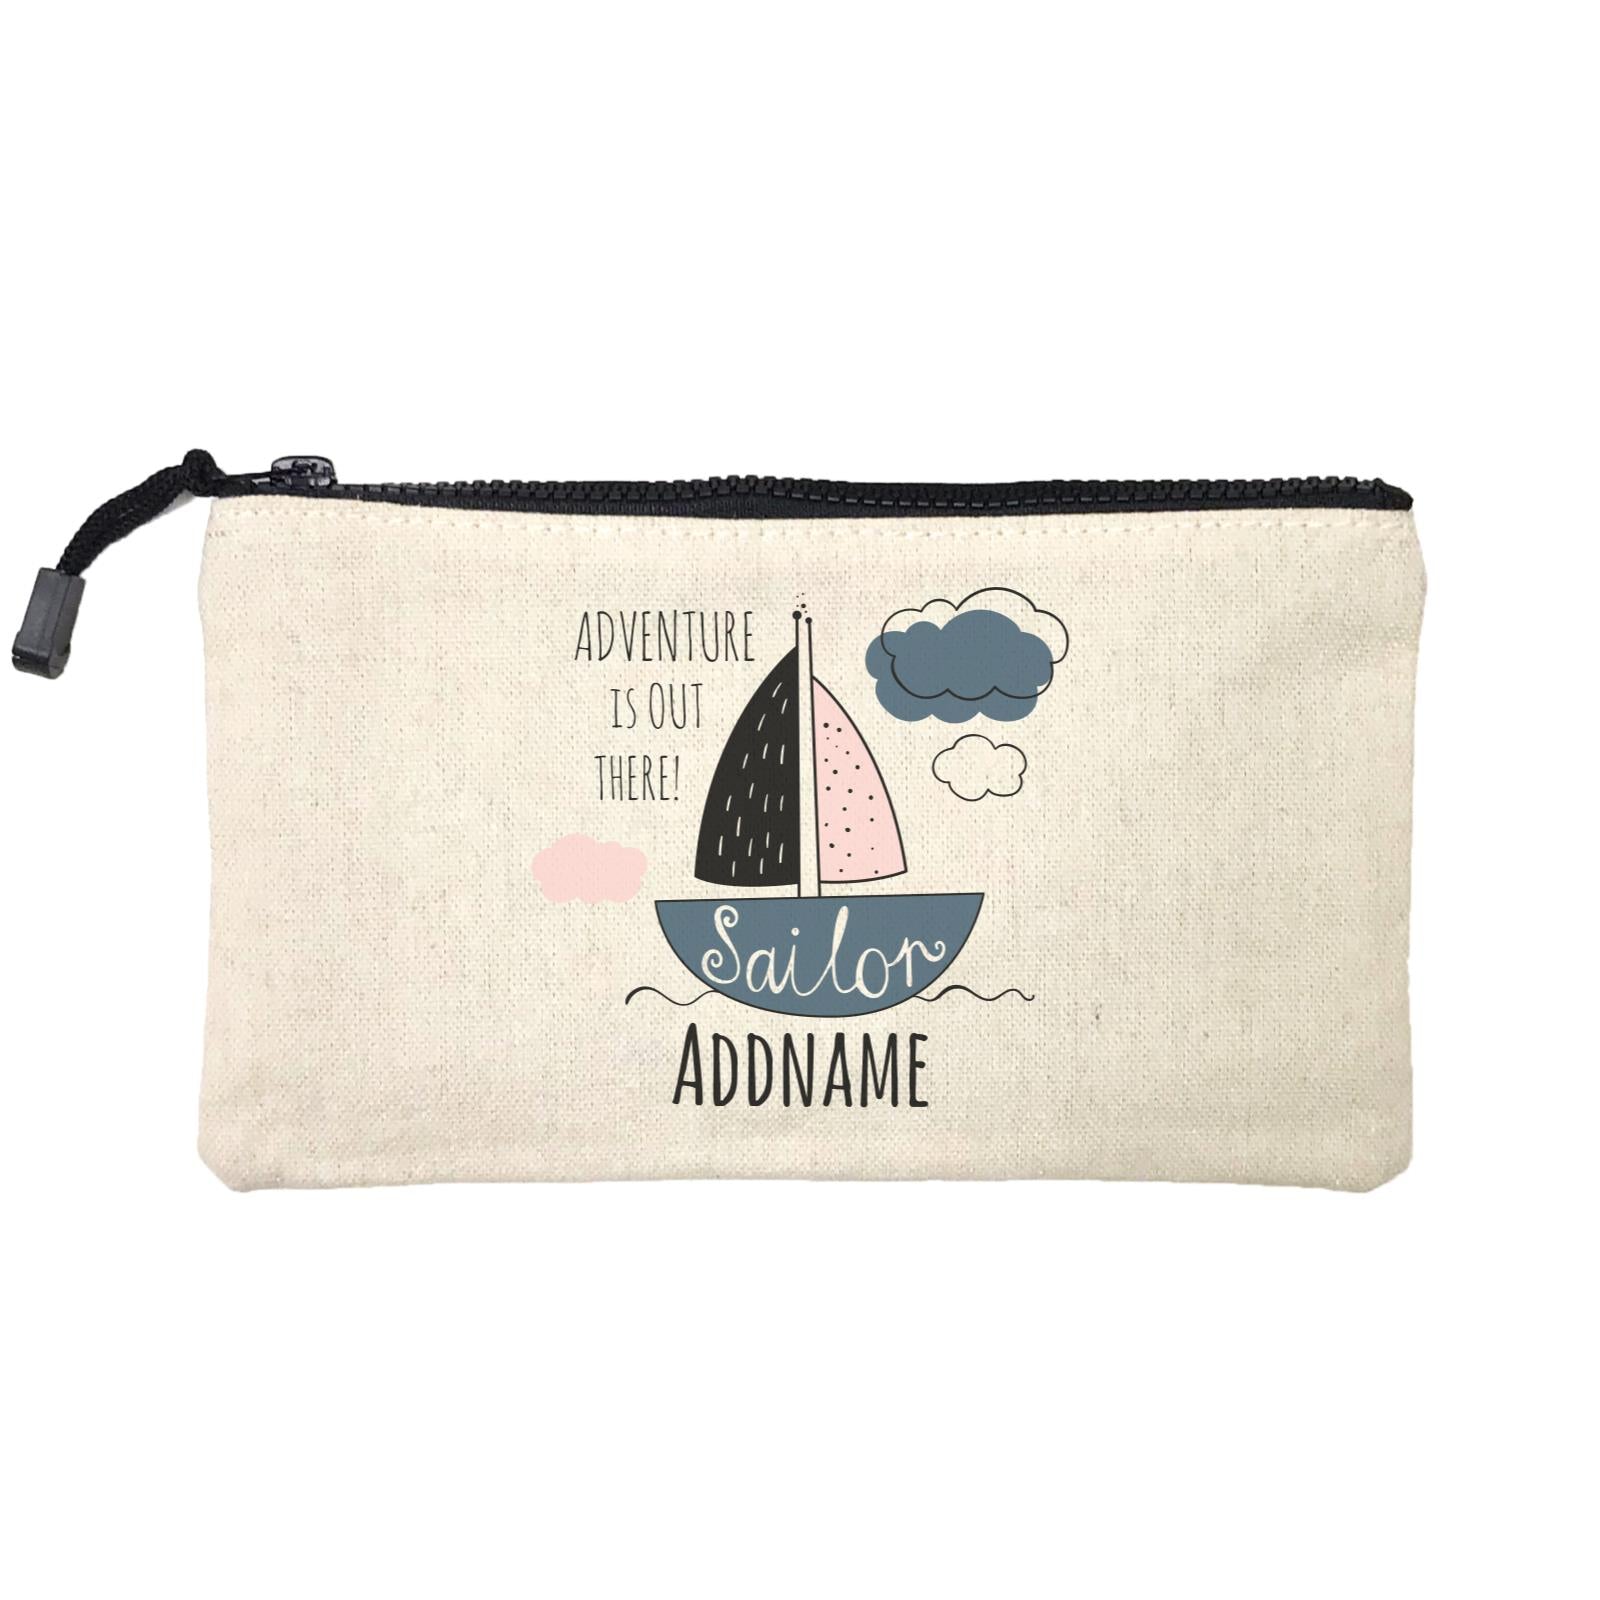 Drawn Ocean Elements Sailor Adventure is Out There Addname Mini Accessories Stationery Pouch